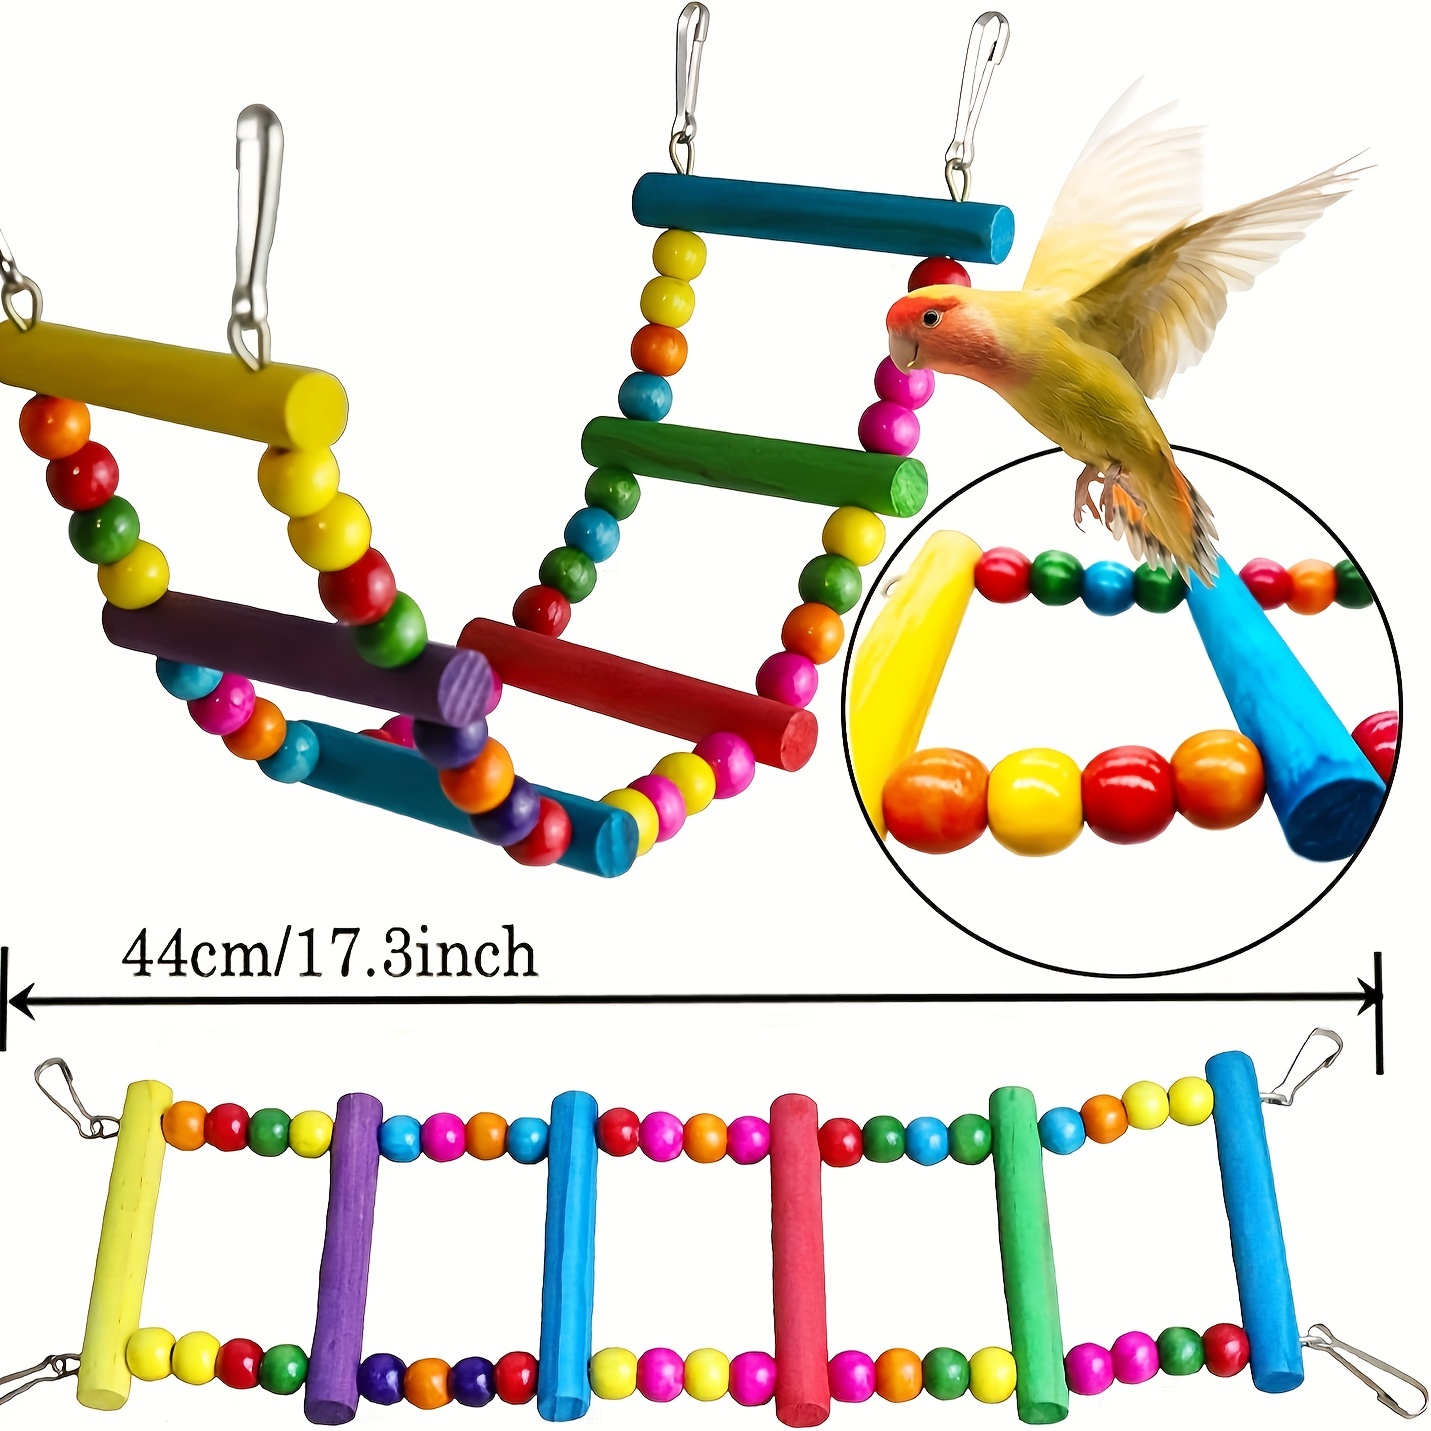 Colourful Wooden Bird Ladder Parrot Toy with Bells